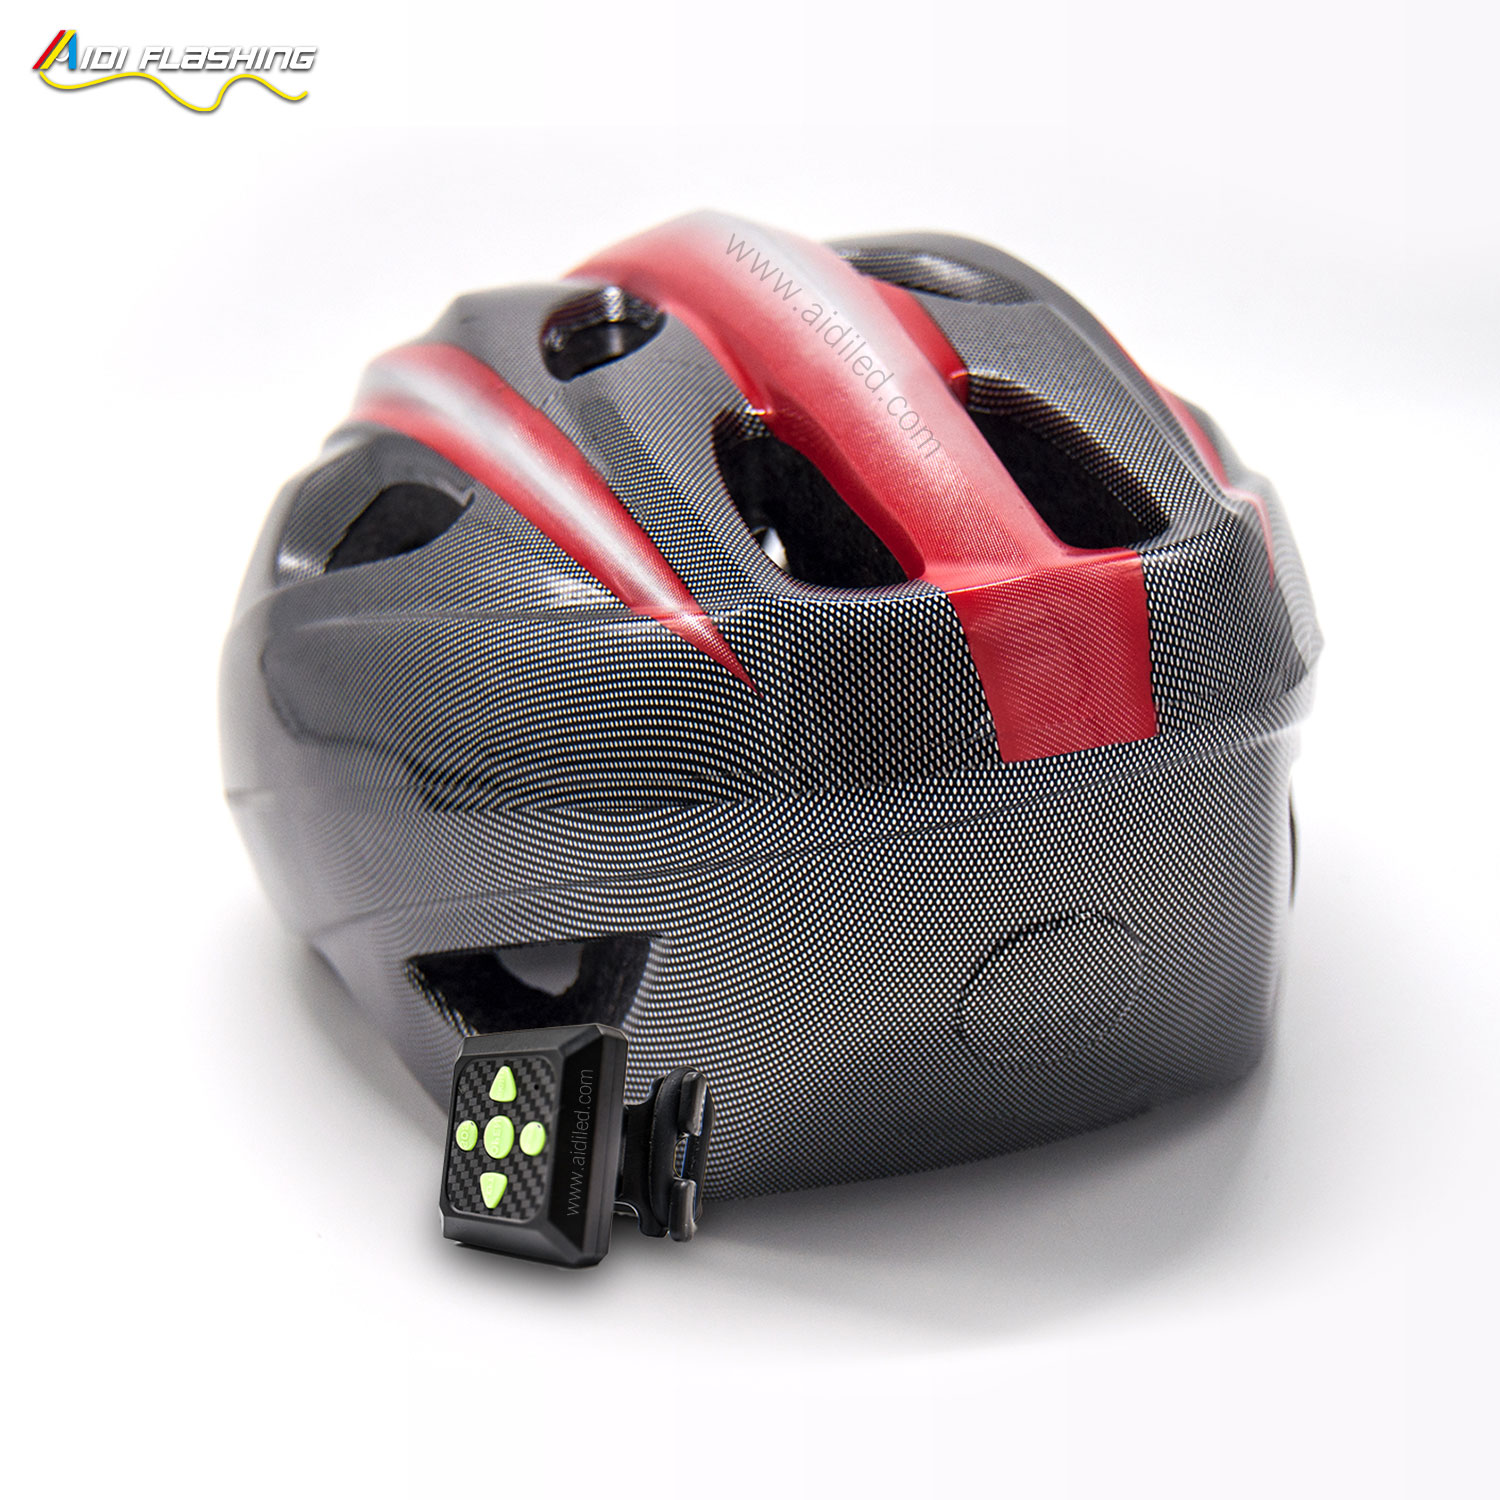 light up smart led helmet for bicycle riding AIDI-S18